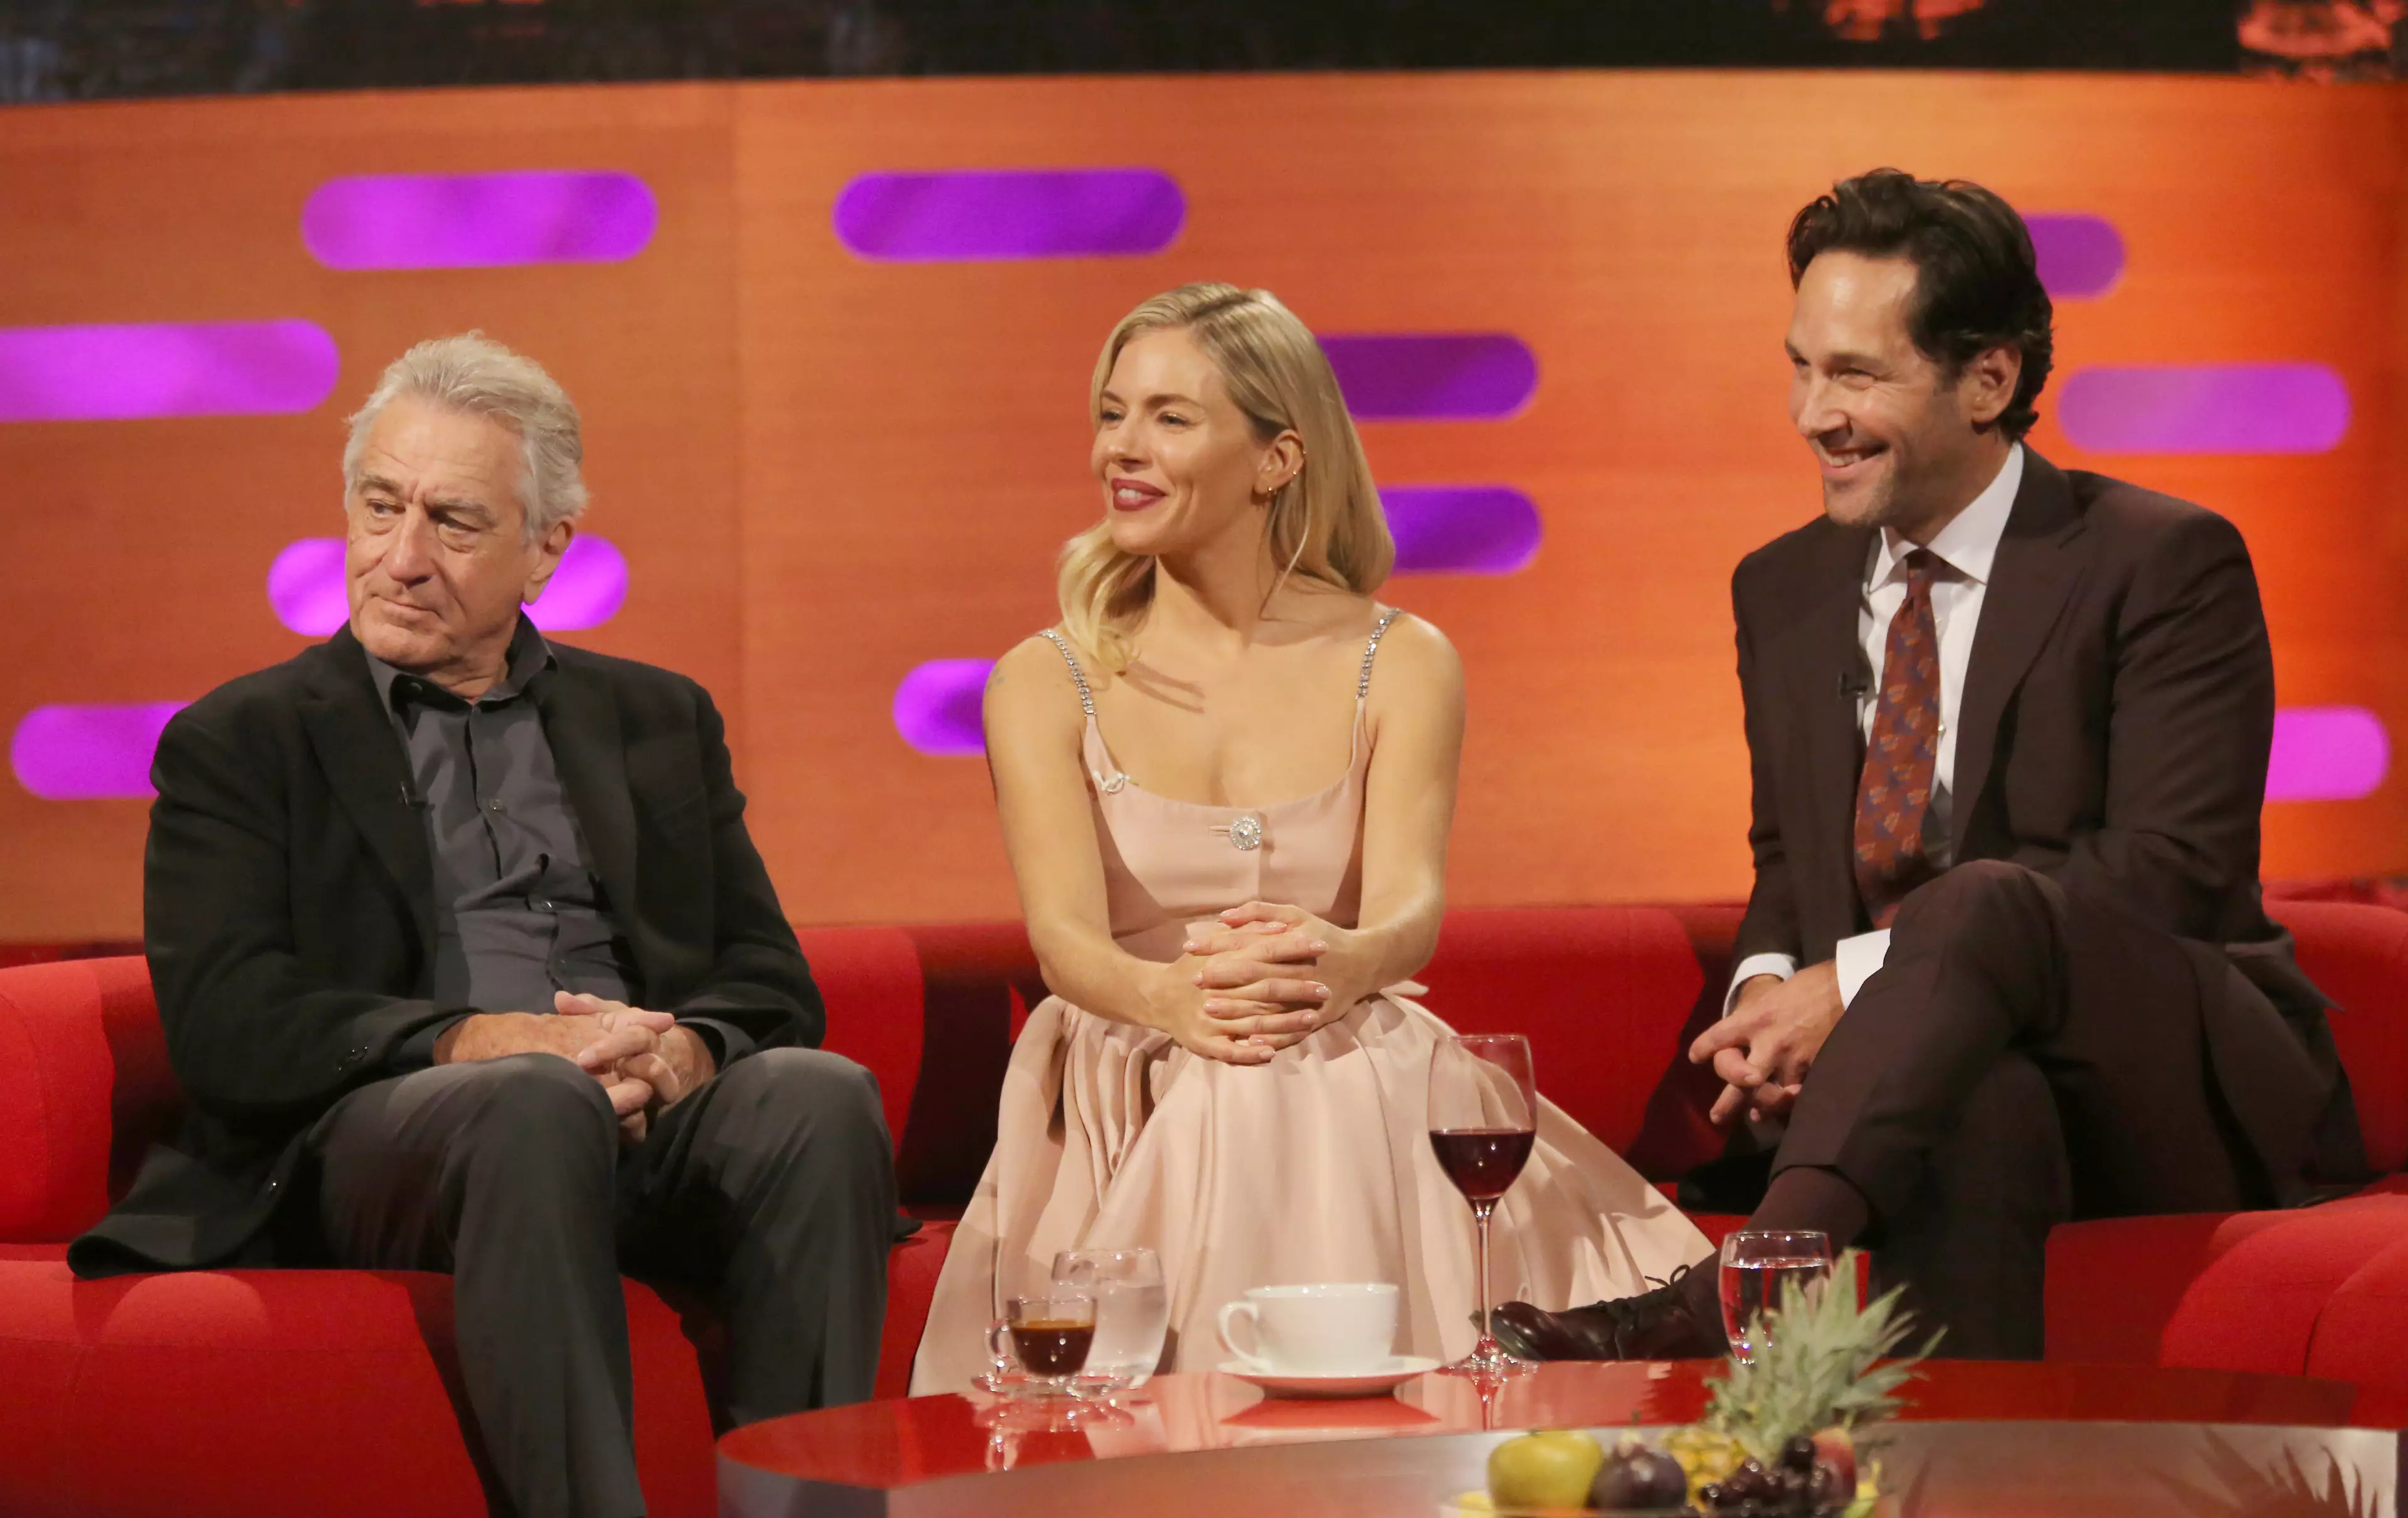 Others joining Paul on tonight's couch are Oscar-winner Robert De Niro and Sienna Miller.